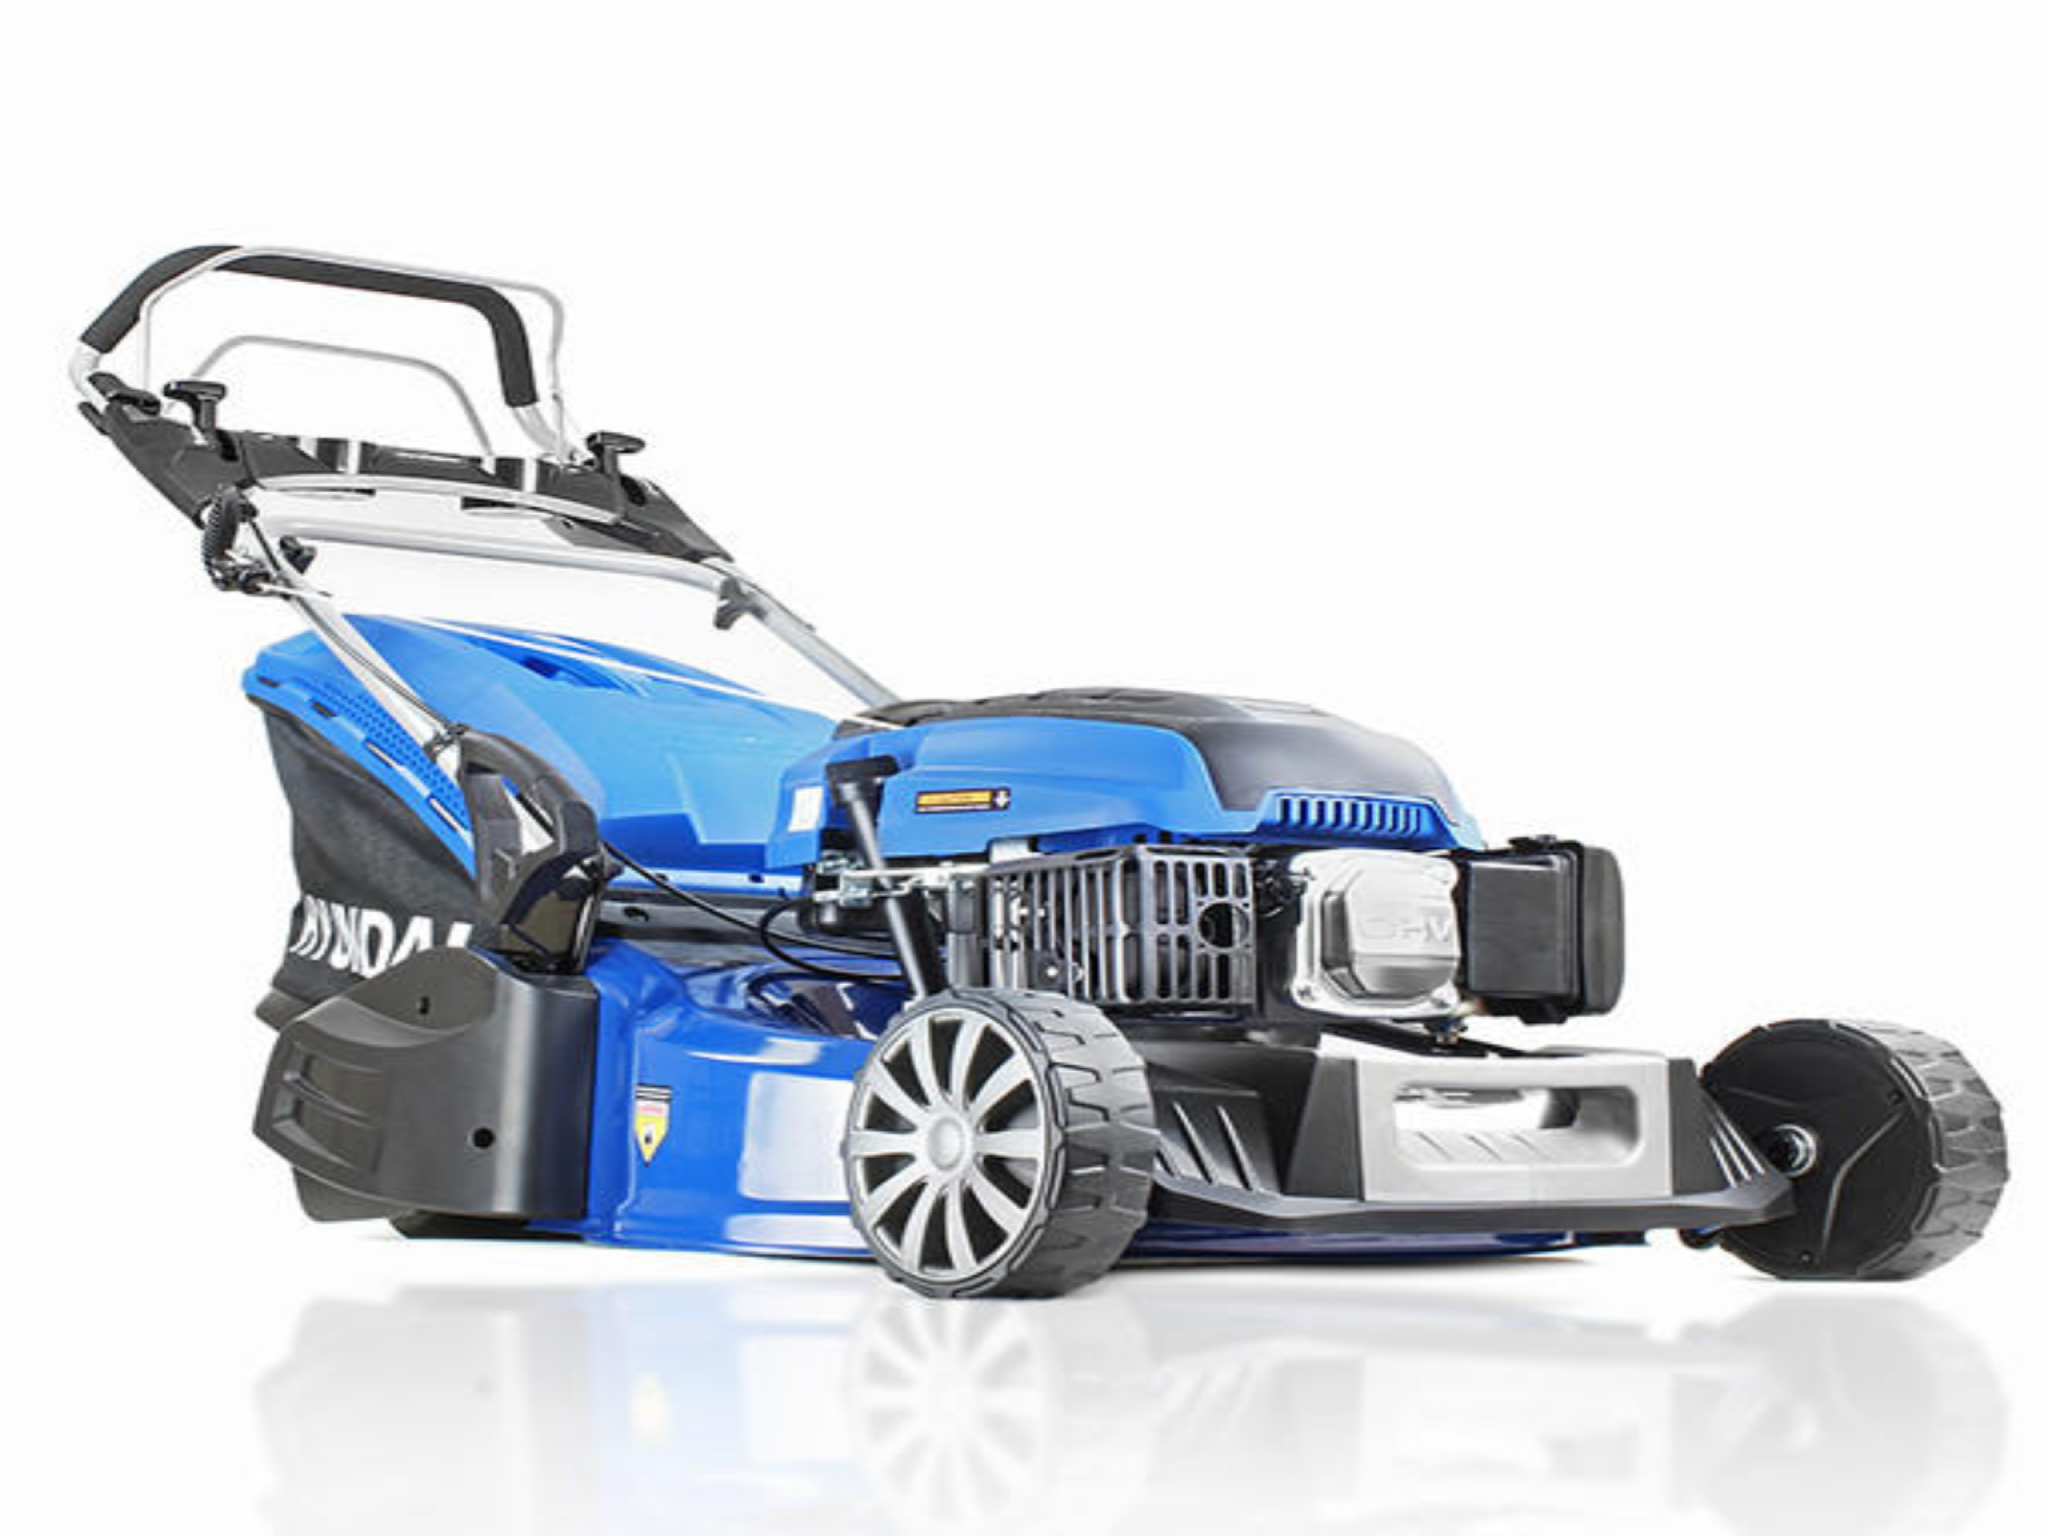 hyundai-indybest-best-lawnmowers-review